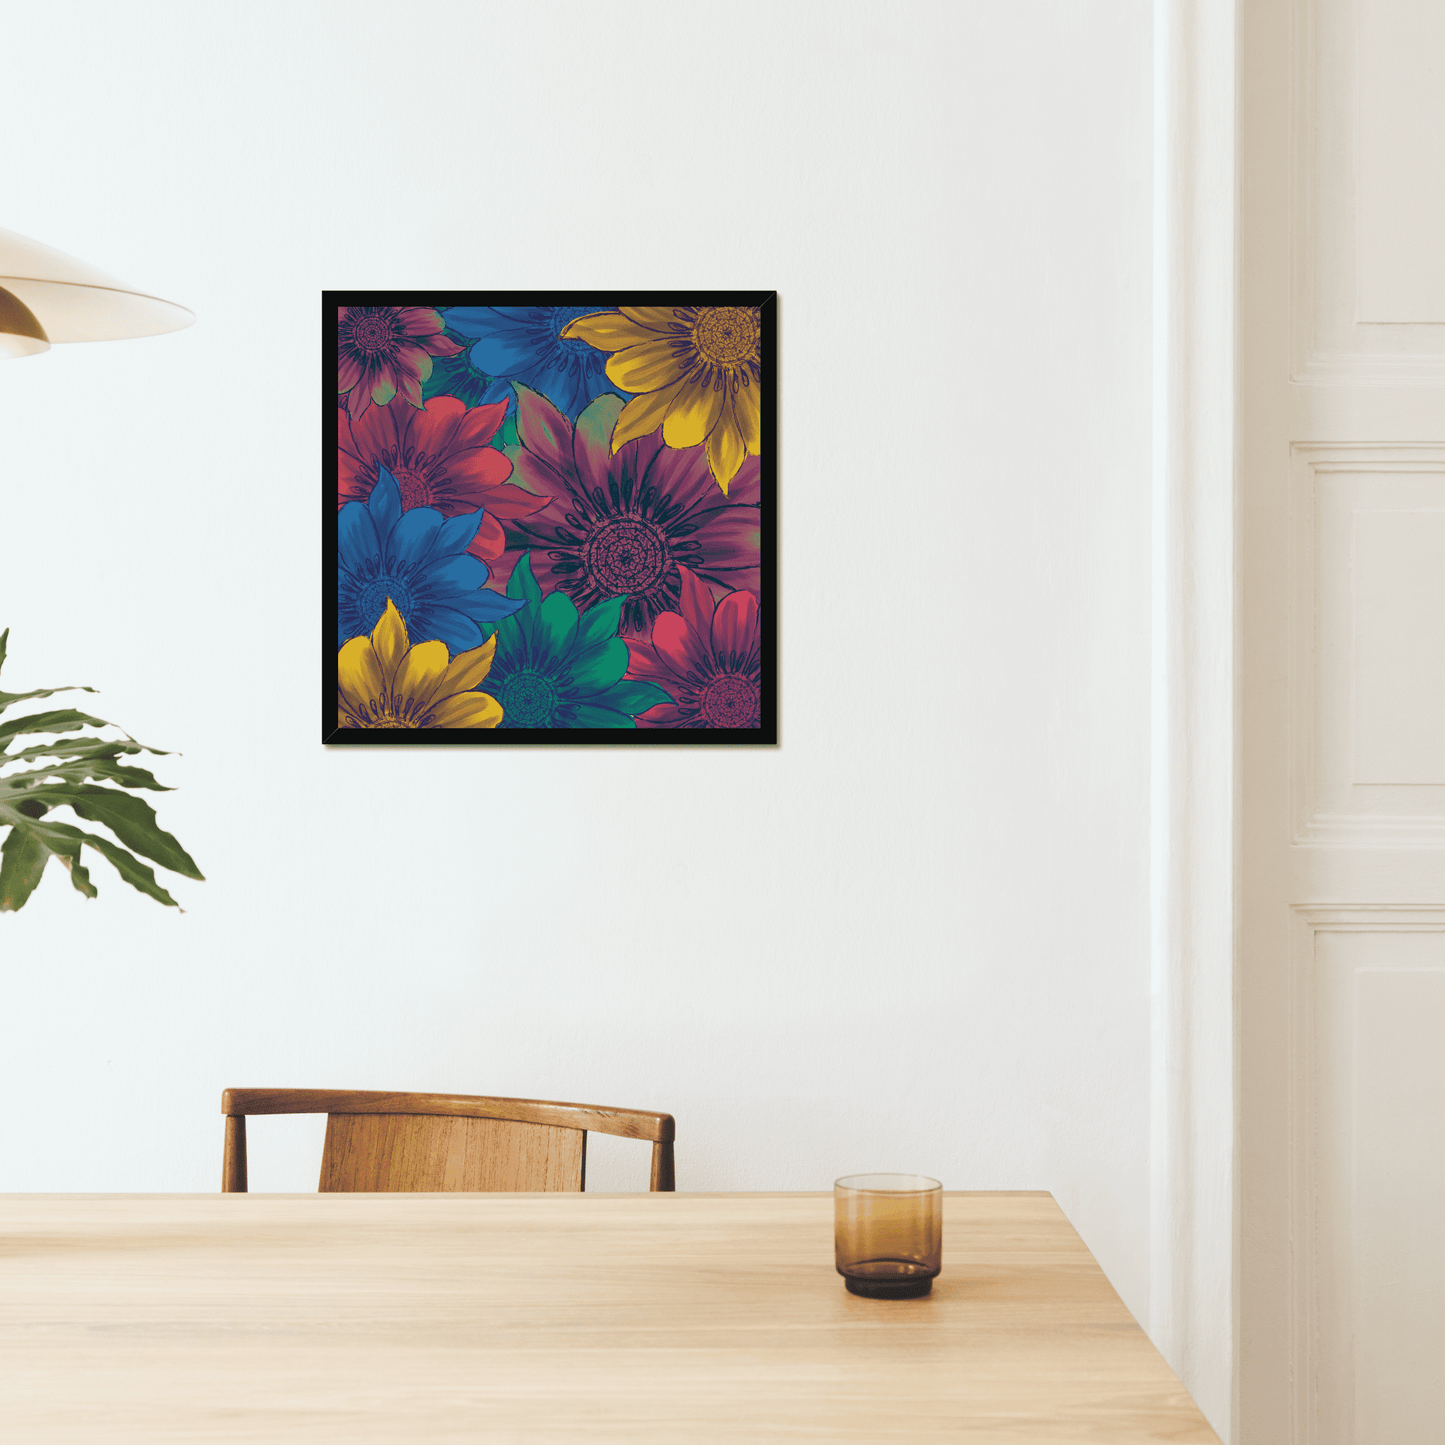 A colourful and trippy collage of flowers print.  This quirky art print is sure to add some eclectic vibes to your walls. The colourful blue, green, yellow and purple flowers really make a statement, and look gorgeous in a colourful boho setting.  A statement for your decor, standalone or as part of you gallery wall.